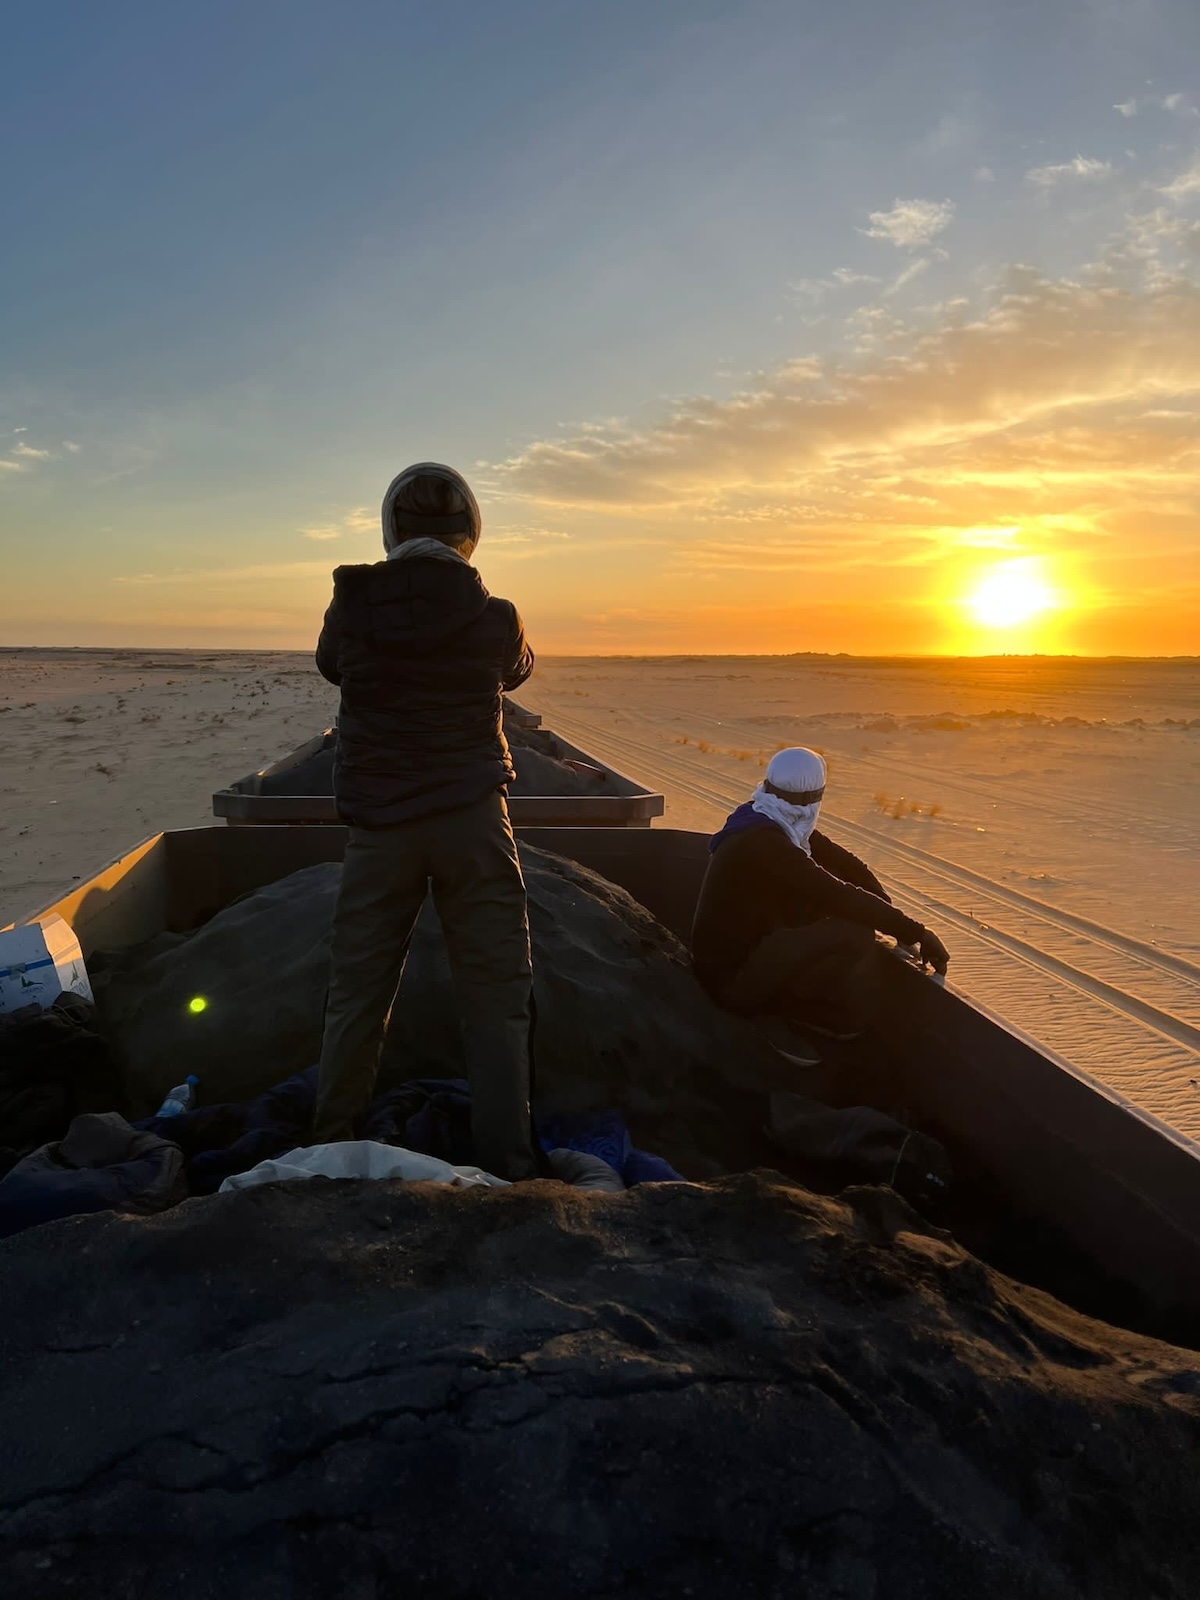 Sunset views while riding the iron ore train in Mauritania 